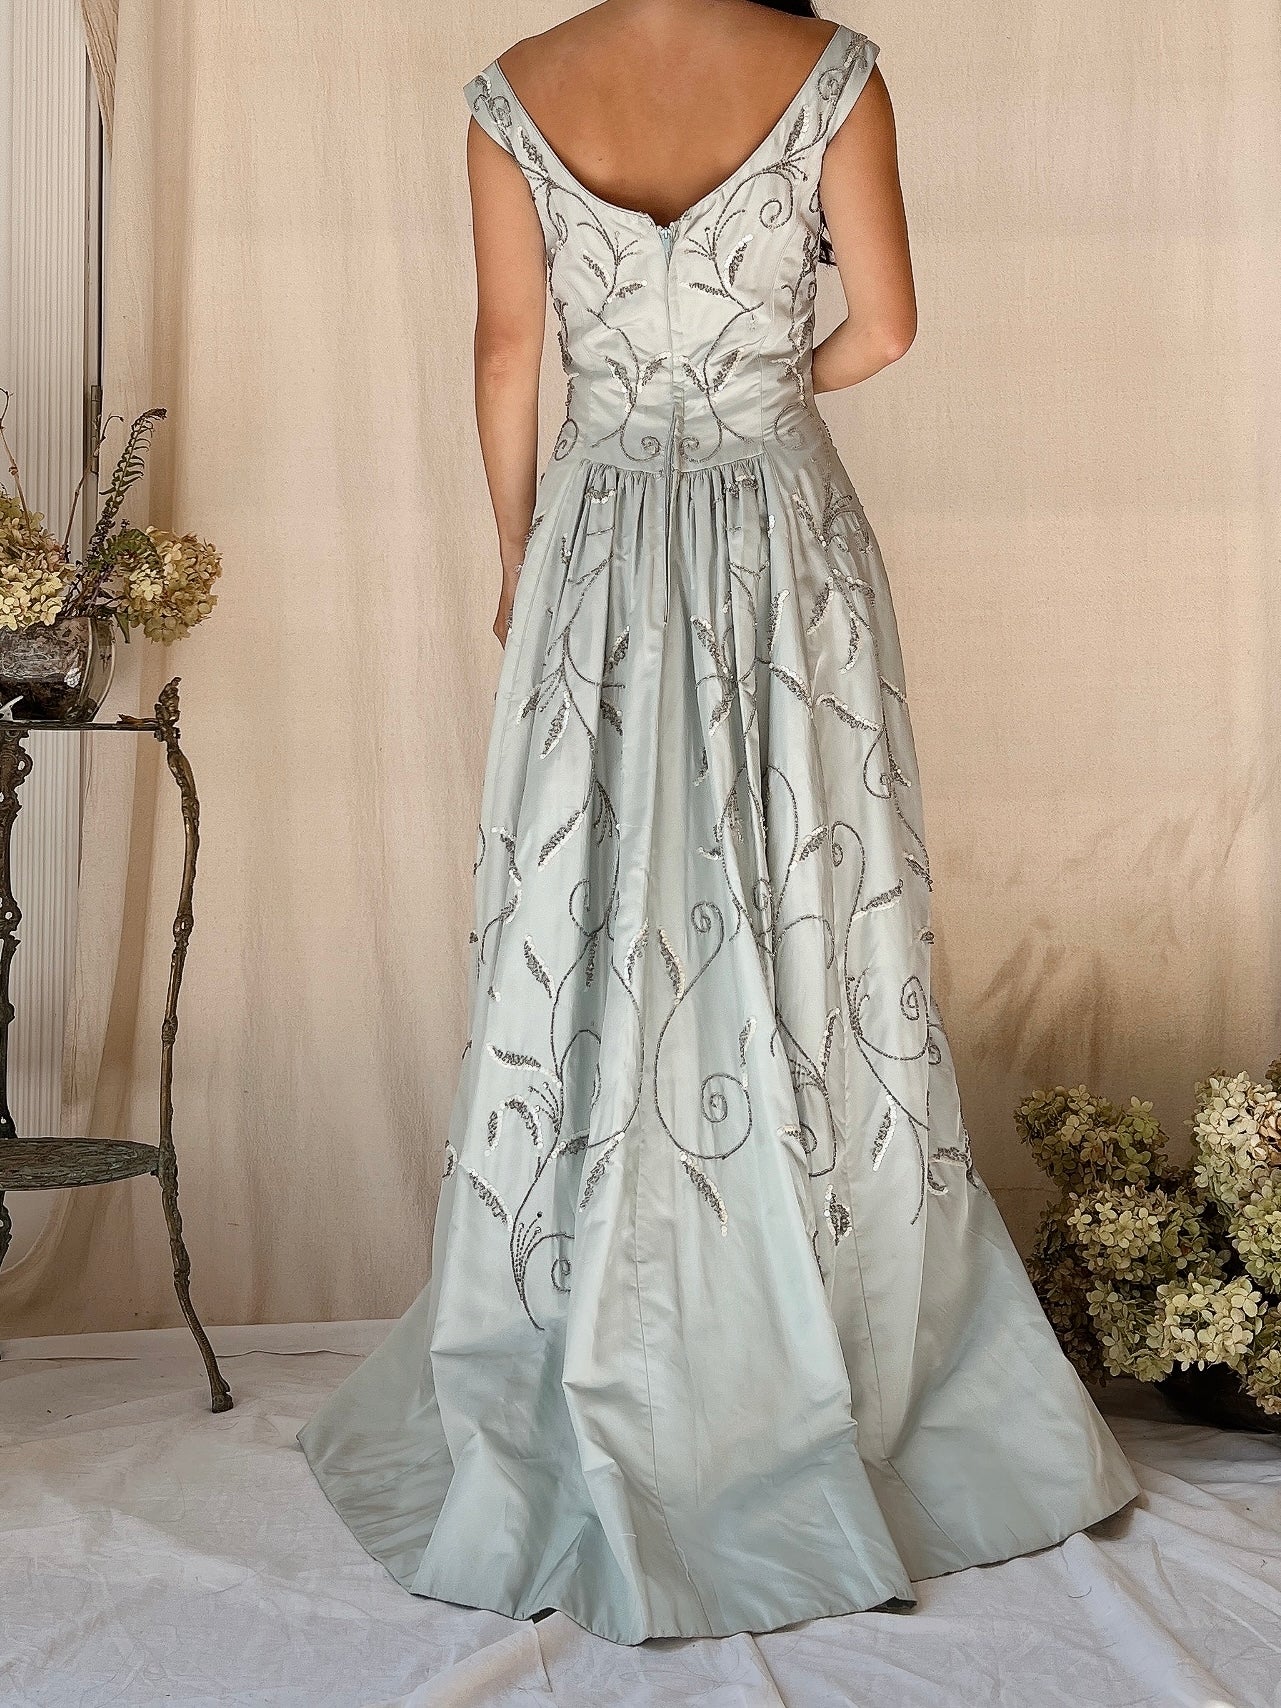 1950s Light Blue Satin Beaded Gown - XS/S